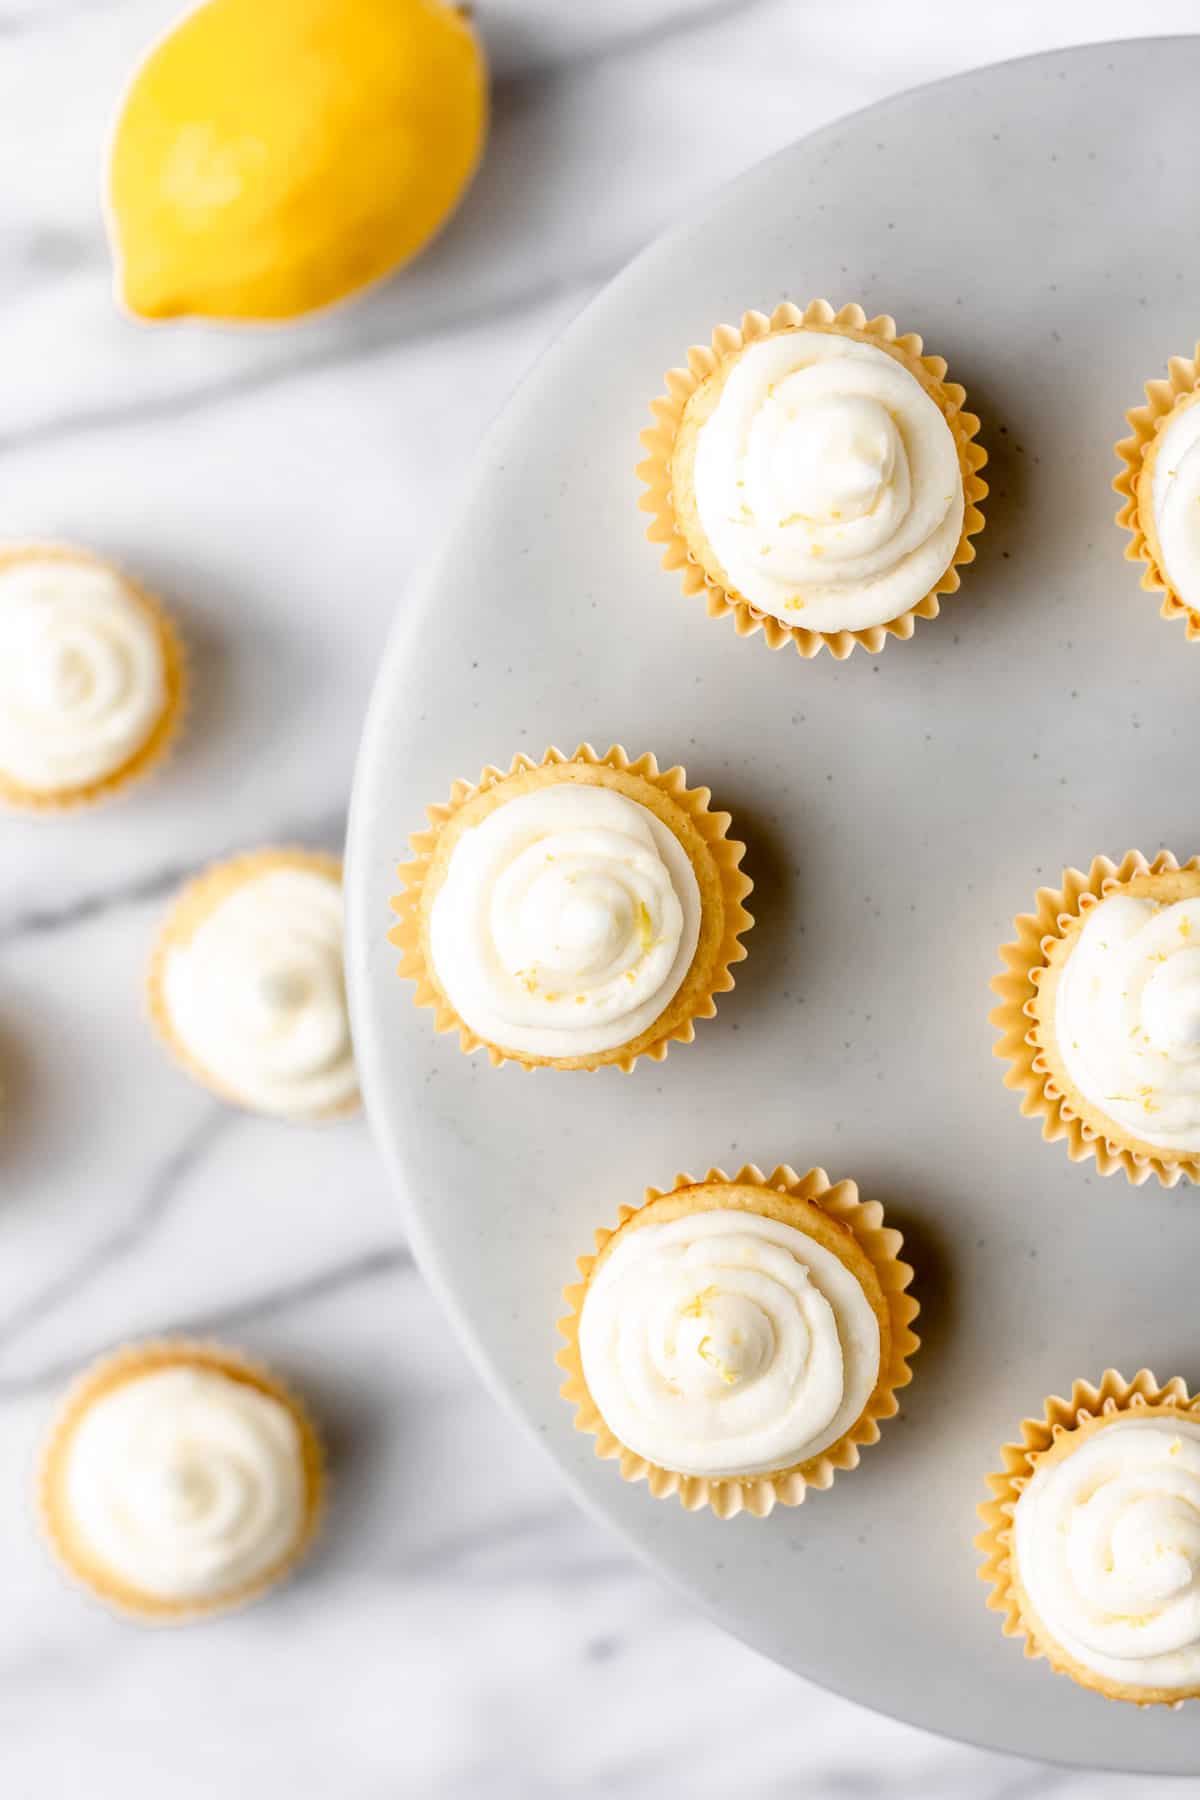 Overhead of mini lemon cupcakes on a cake stand with more on the table below with a lemon.